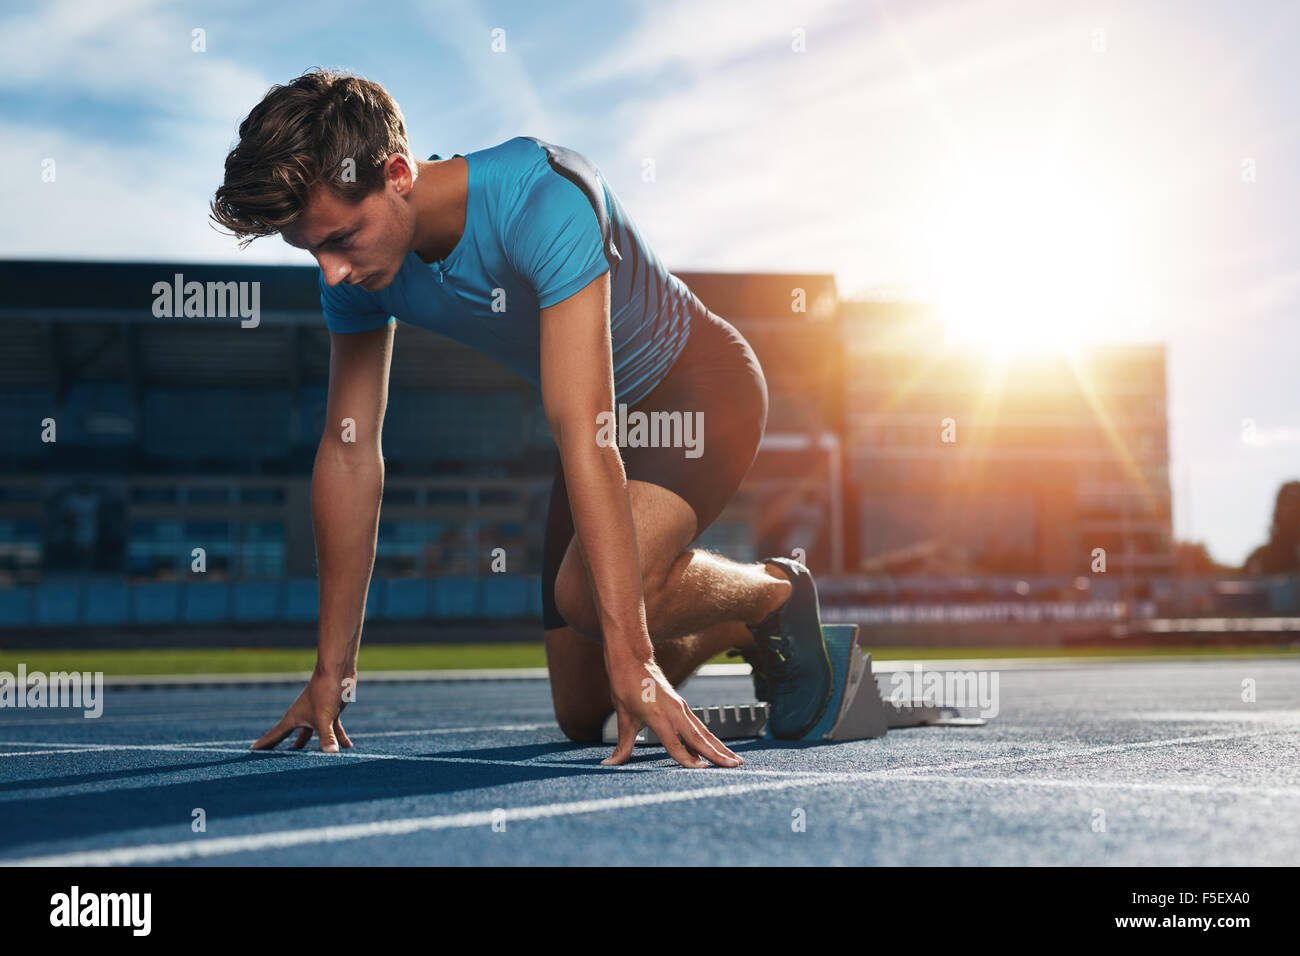 Young male athlete at starting block on running track. Young man in starting position for running on sports track. Sprinter abou Stock Photo